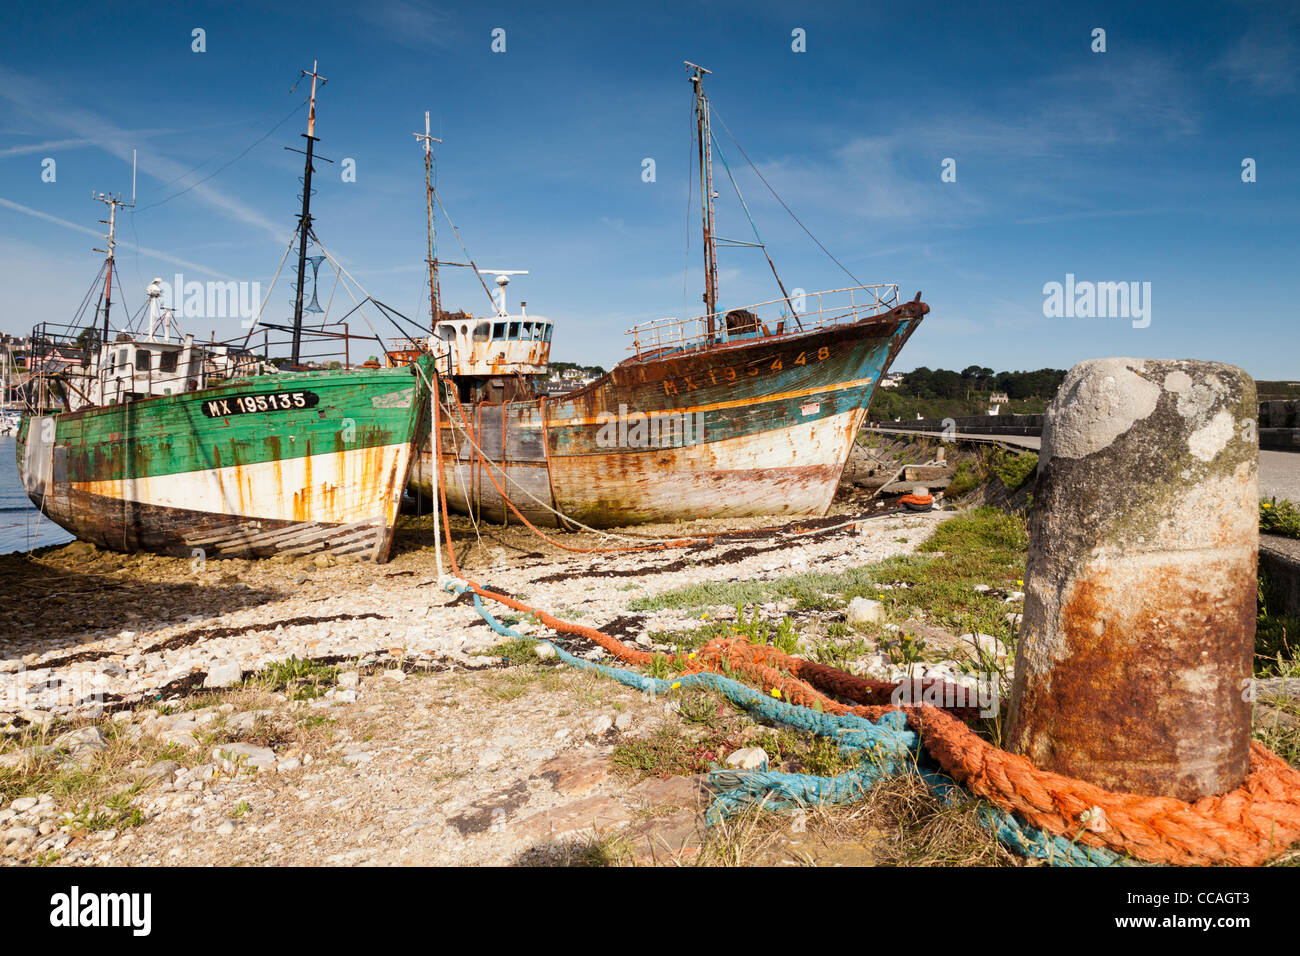 Old fishing boats drawn up on the shingle in the harbour at Camaret sur Mer, Brittany, France. Stock Photo